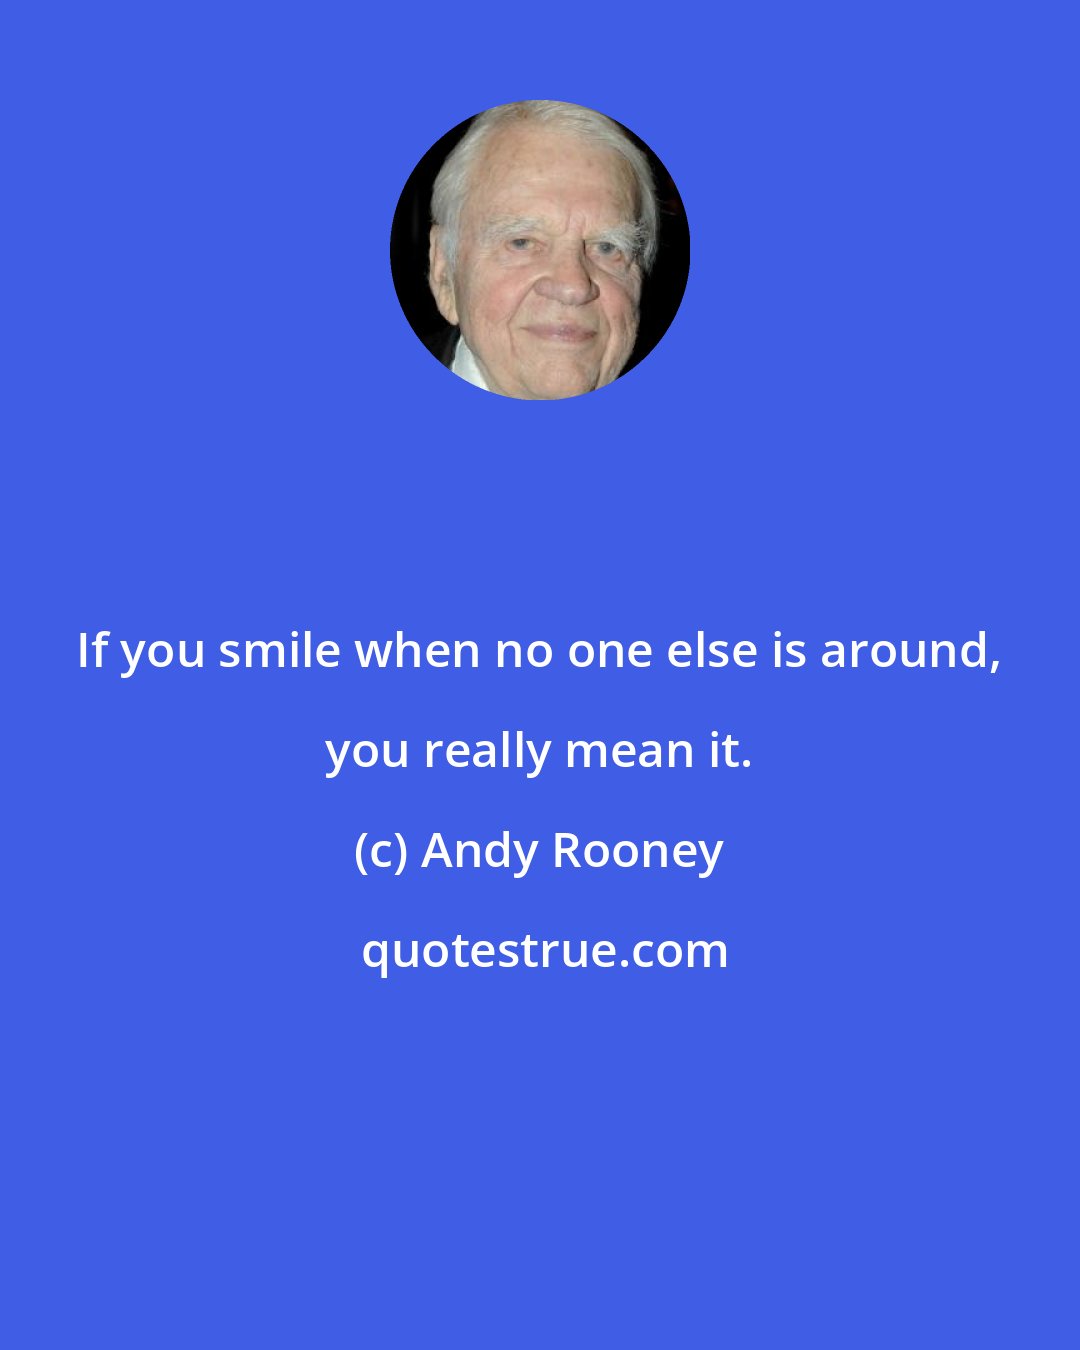 Andy Rooney: If you smile when no one else is around, you really mean it.